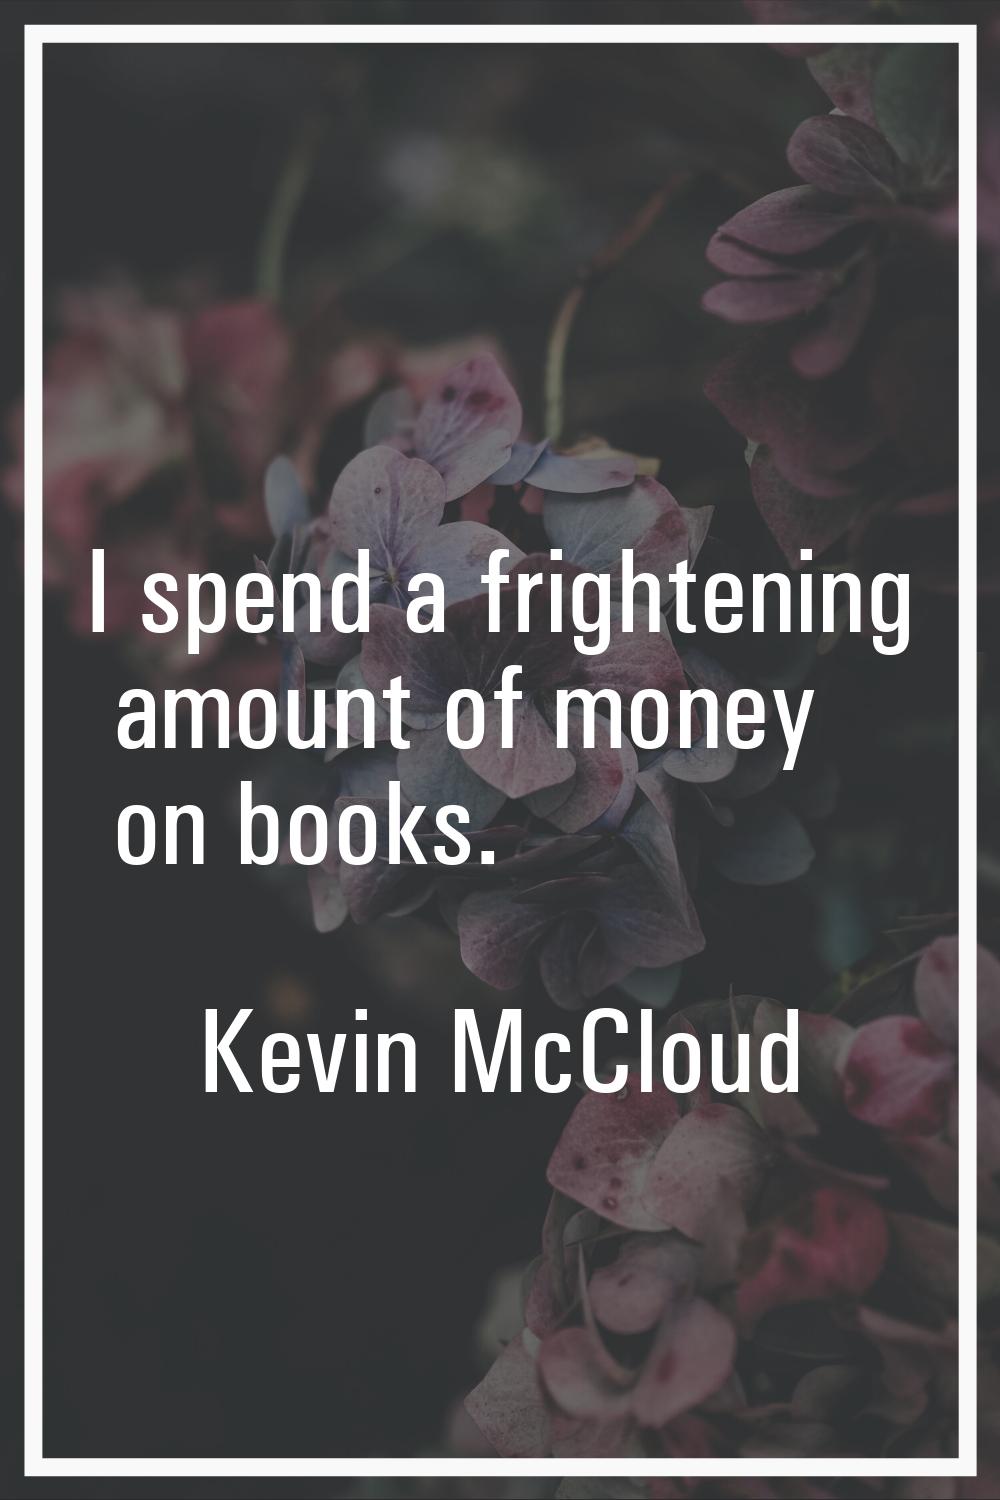 I spend a frightening amount of money on books.